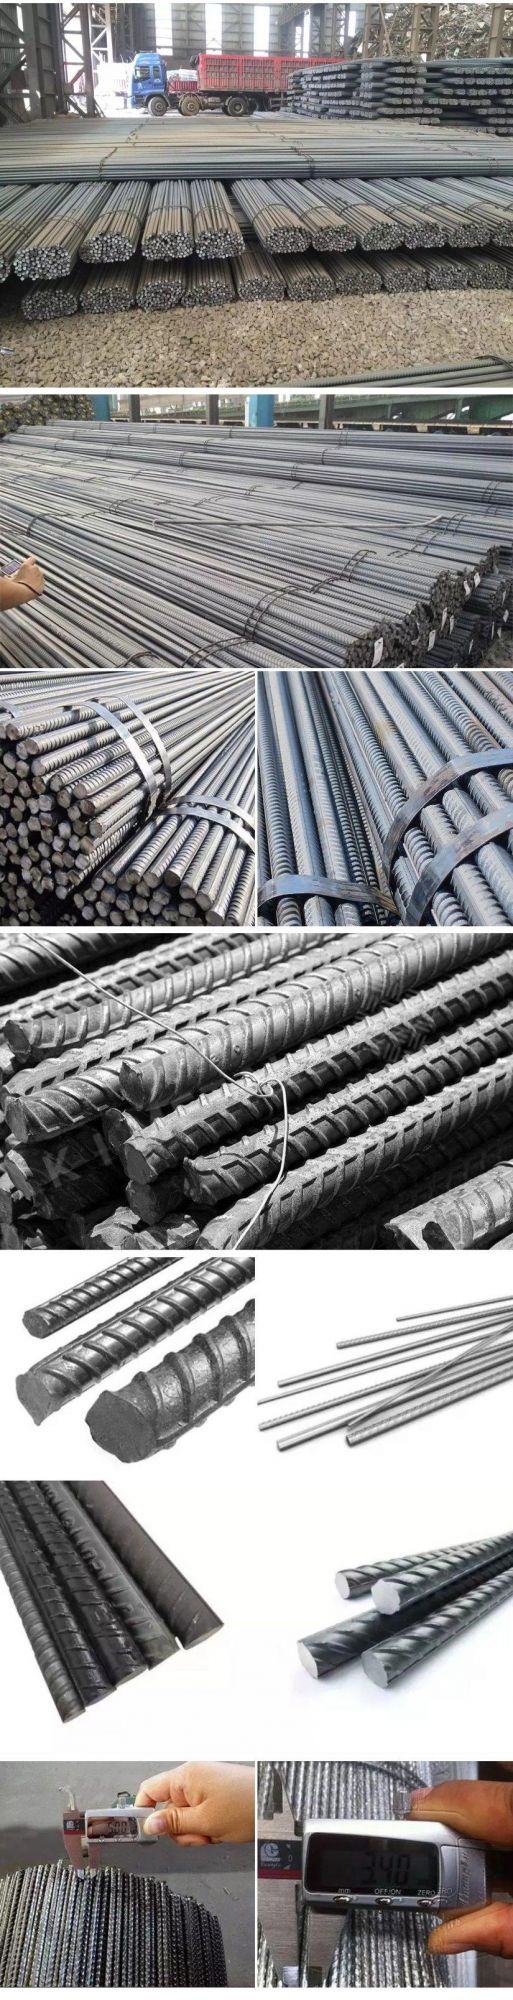 ASTM A615 4 Sut Saria Price Today 10 mm Tmt Bar Price